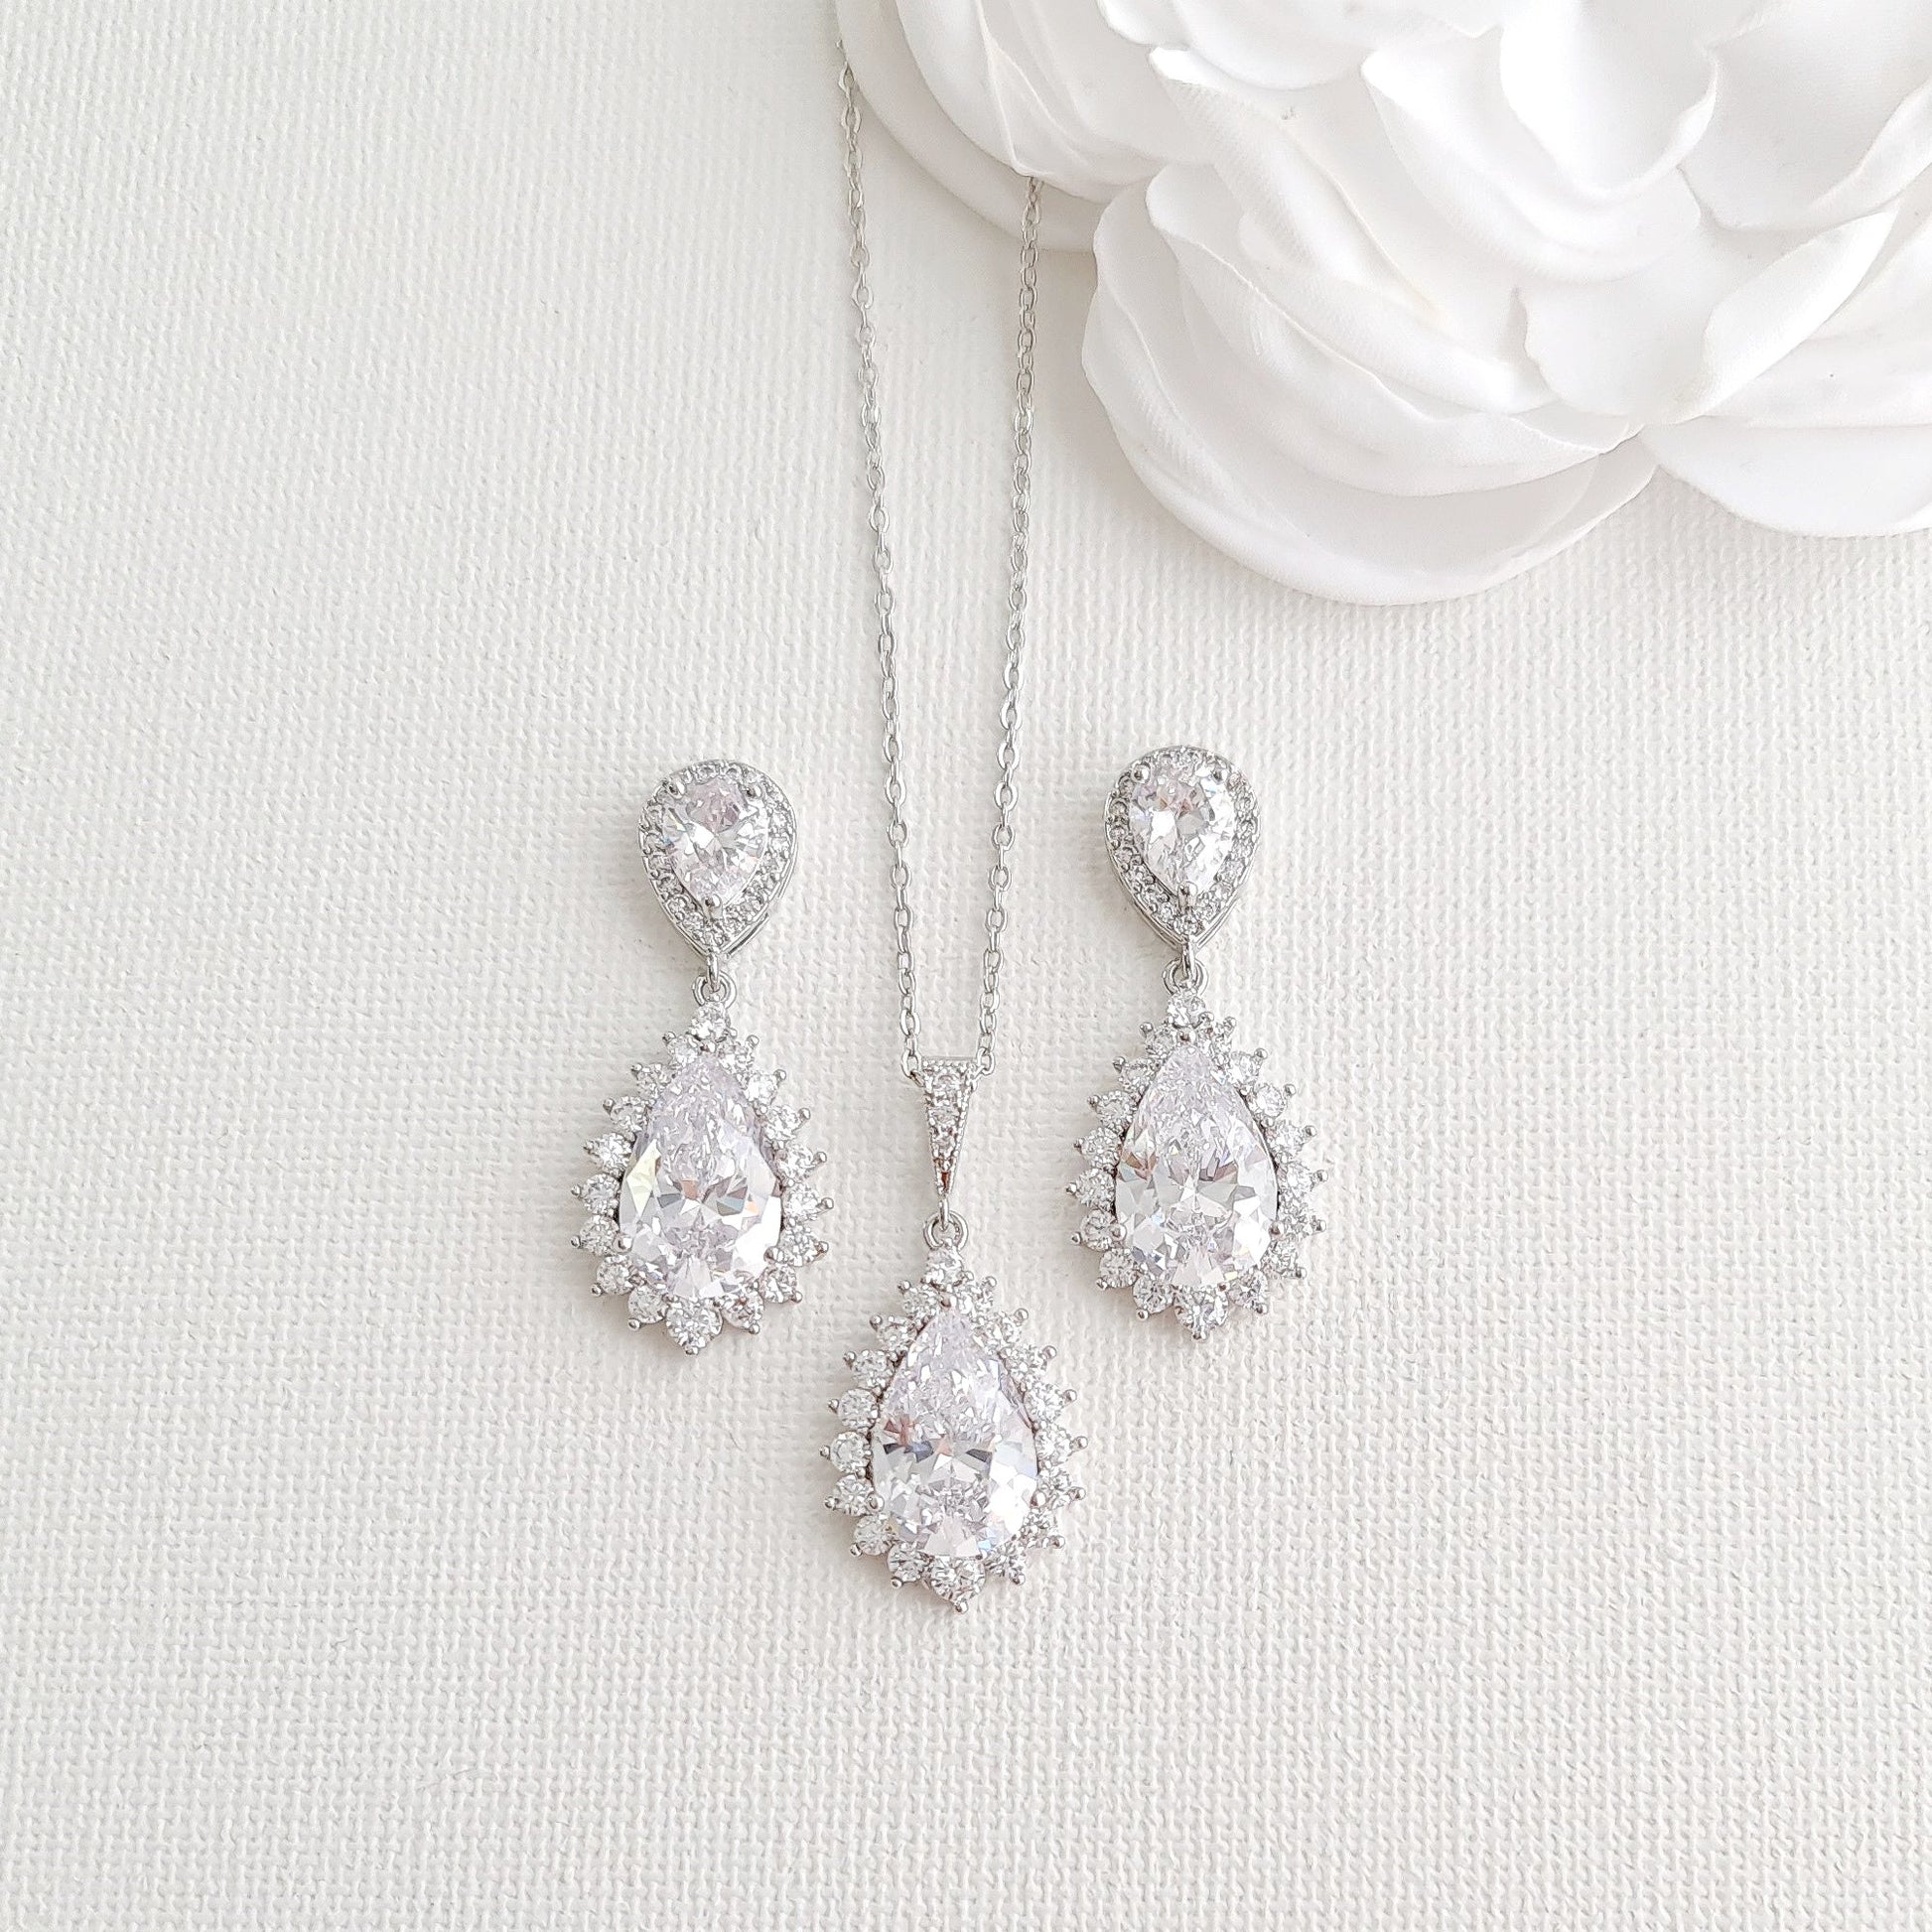 Silver and CA earrings and necklace set